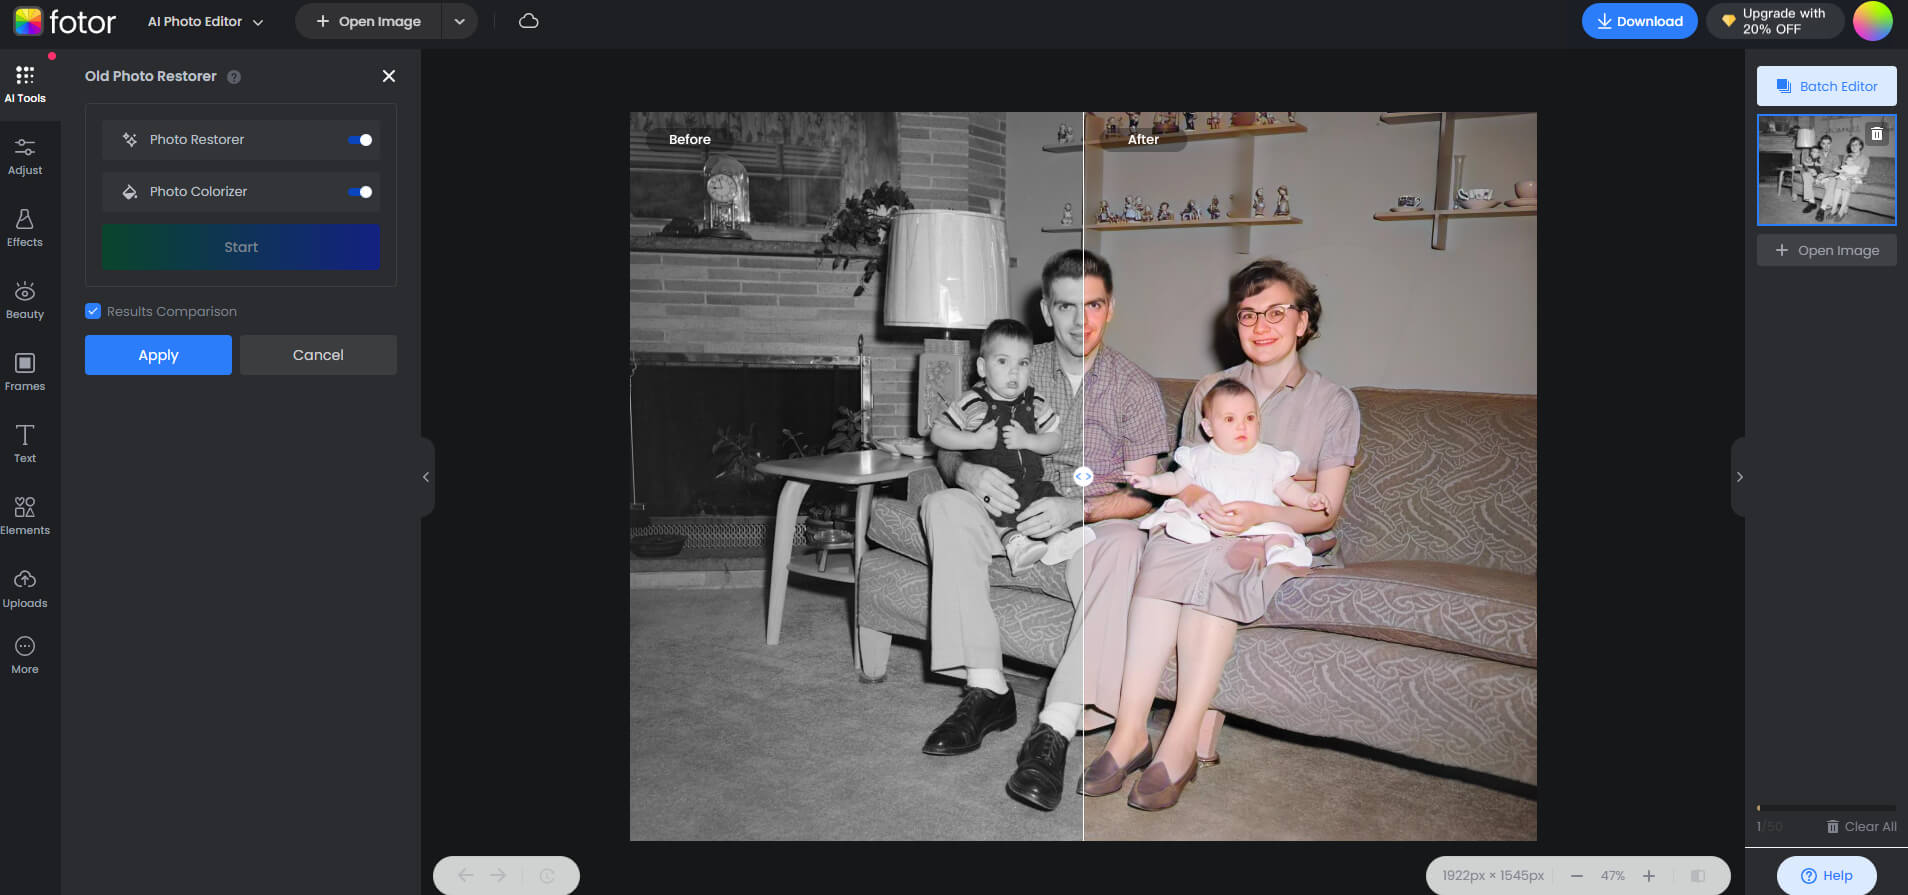 restore and colorize an old black and white family photo on fotor